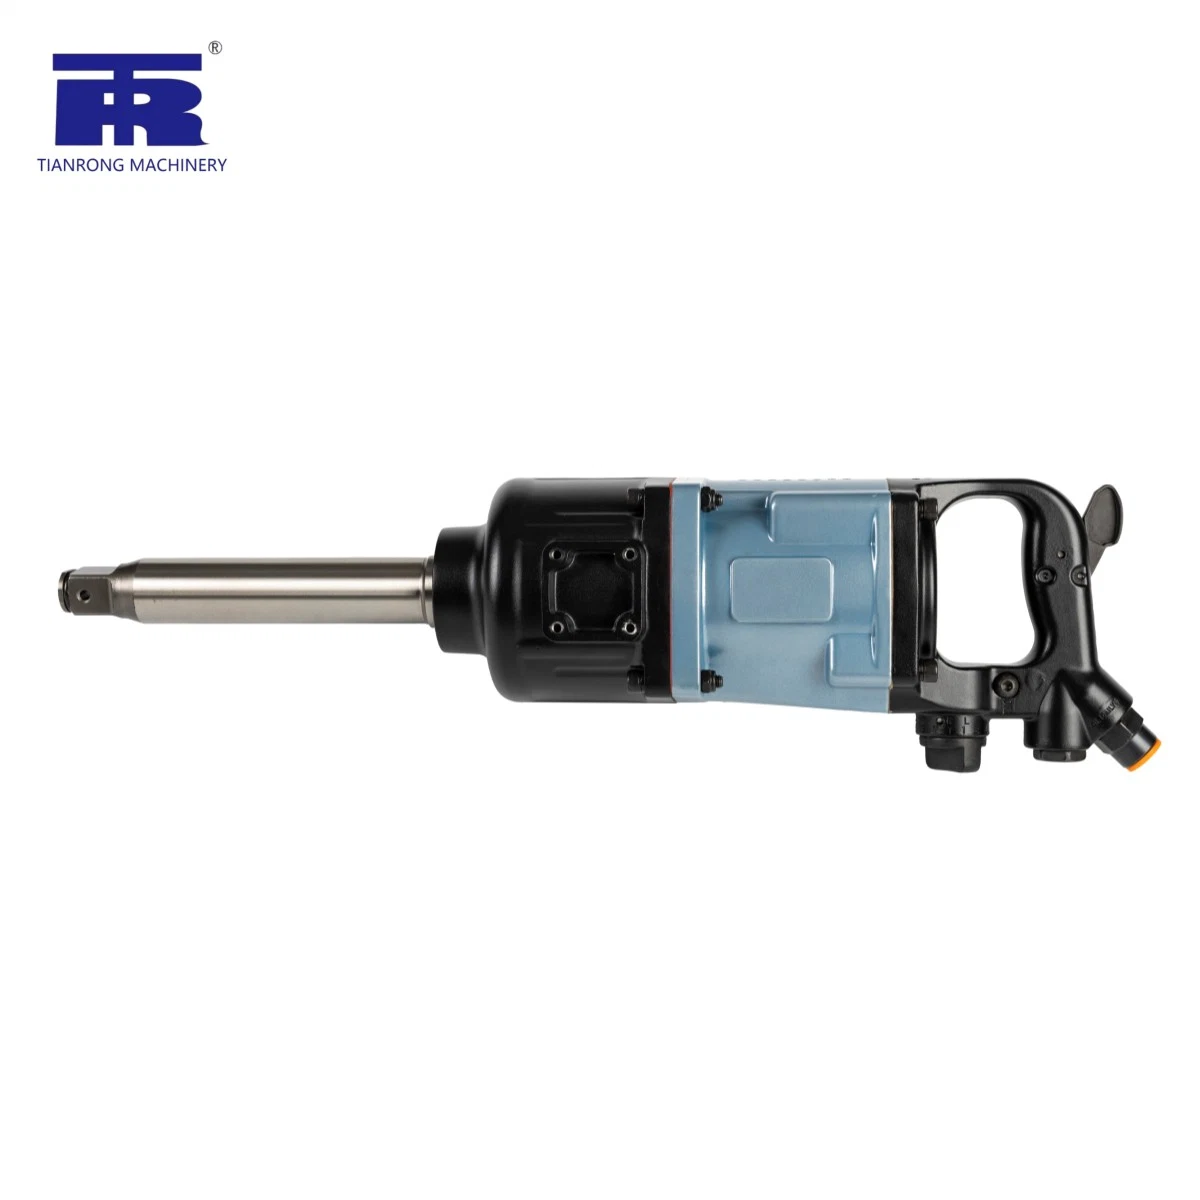 1 Inch Power Tool Pneumatic Wrench Air Impact Wrench Hand Tool for Car Repair